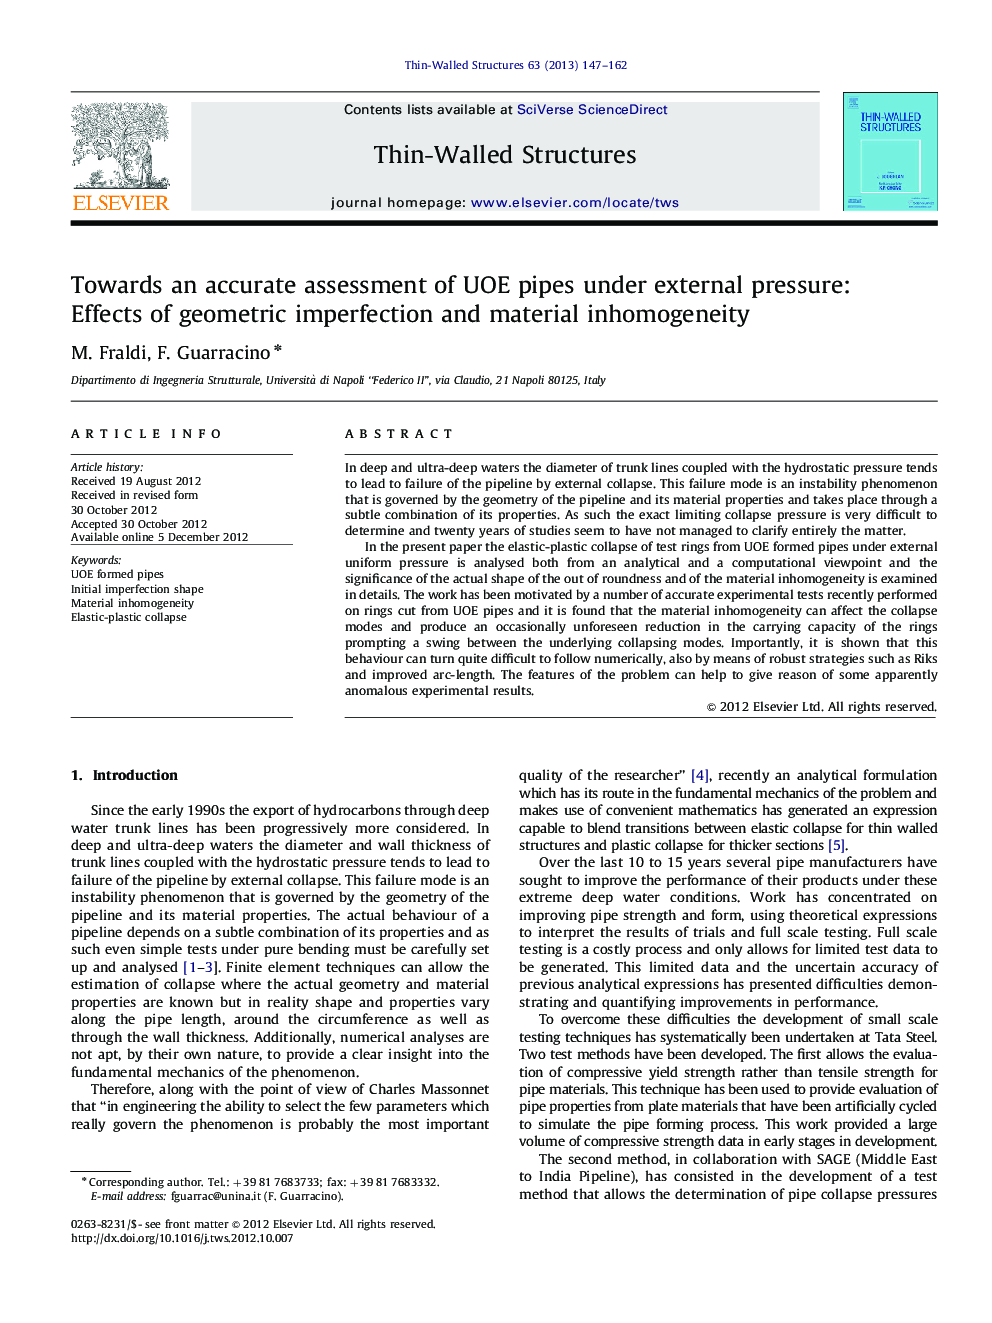 Towards an accurate assessment of UOE pipes under external pressure: Effects of geometric imperfection and material inhomogeneity